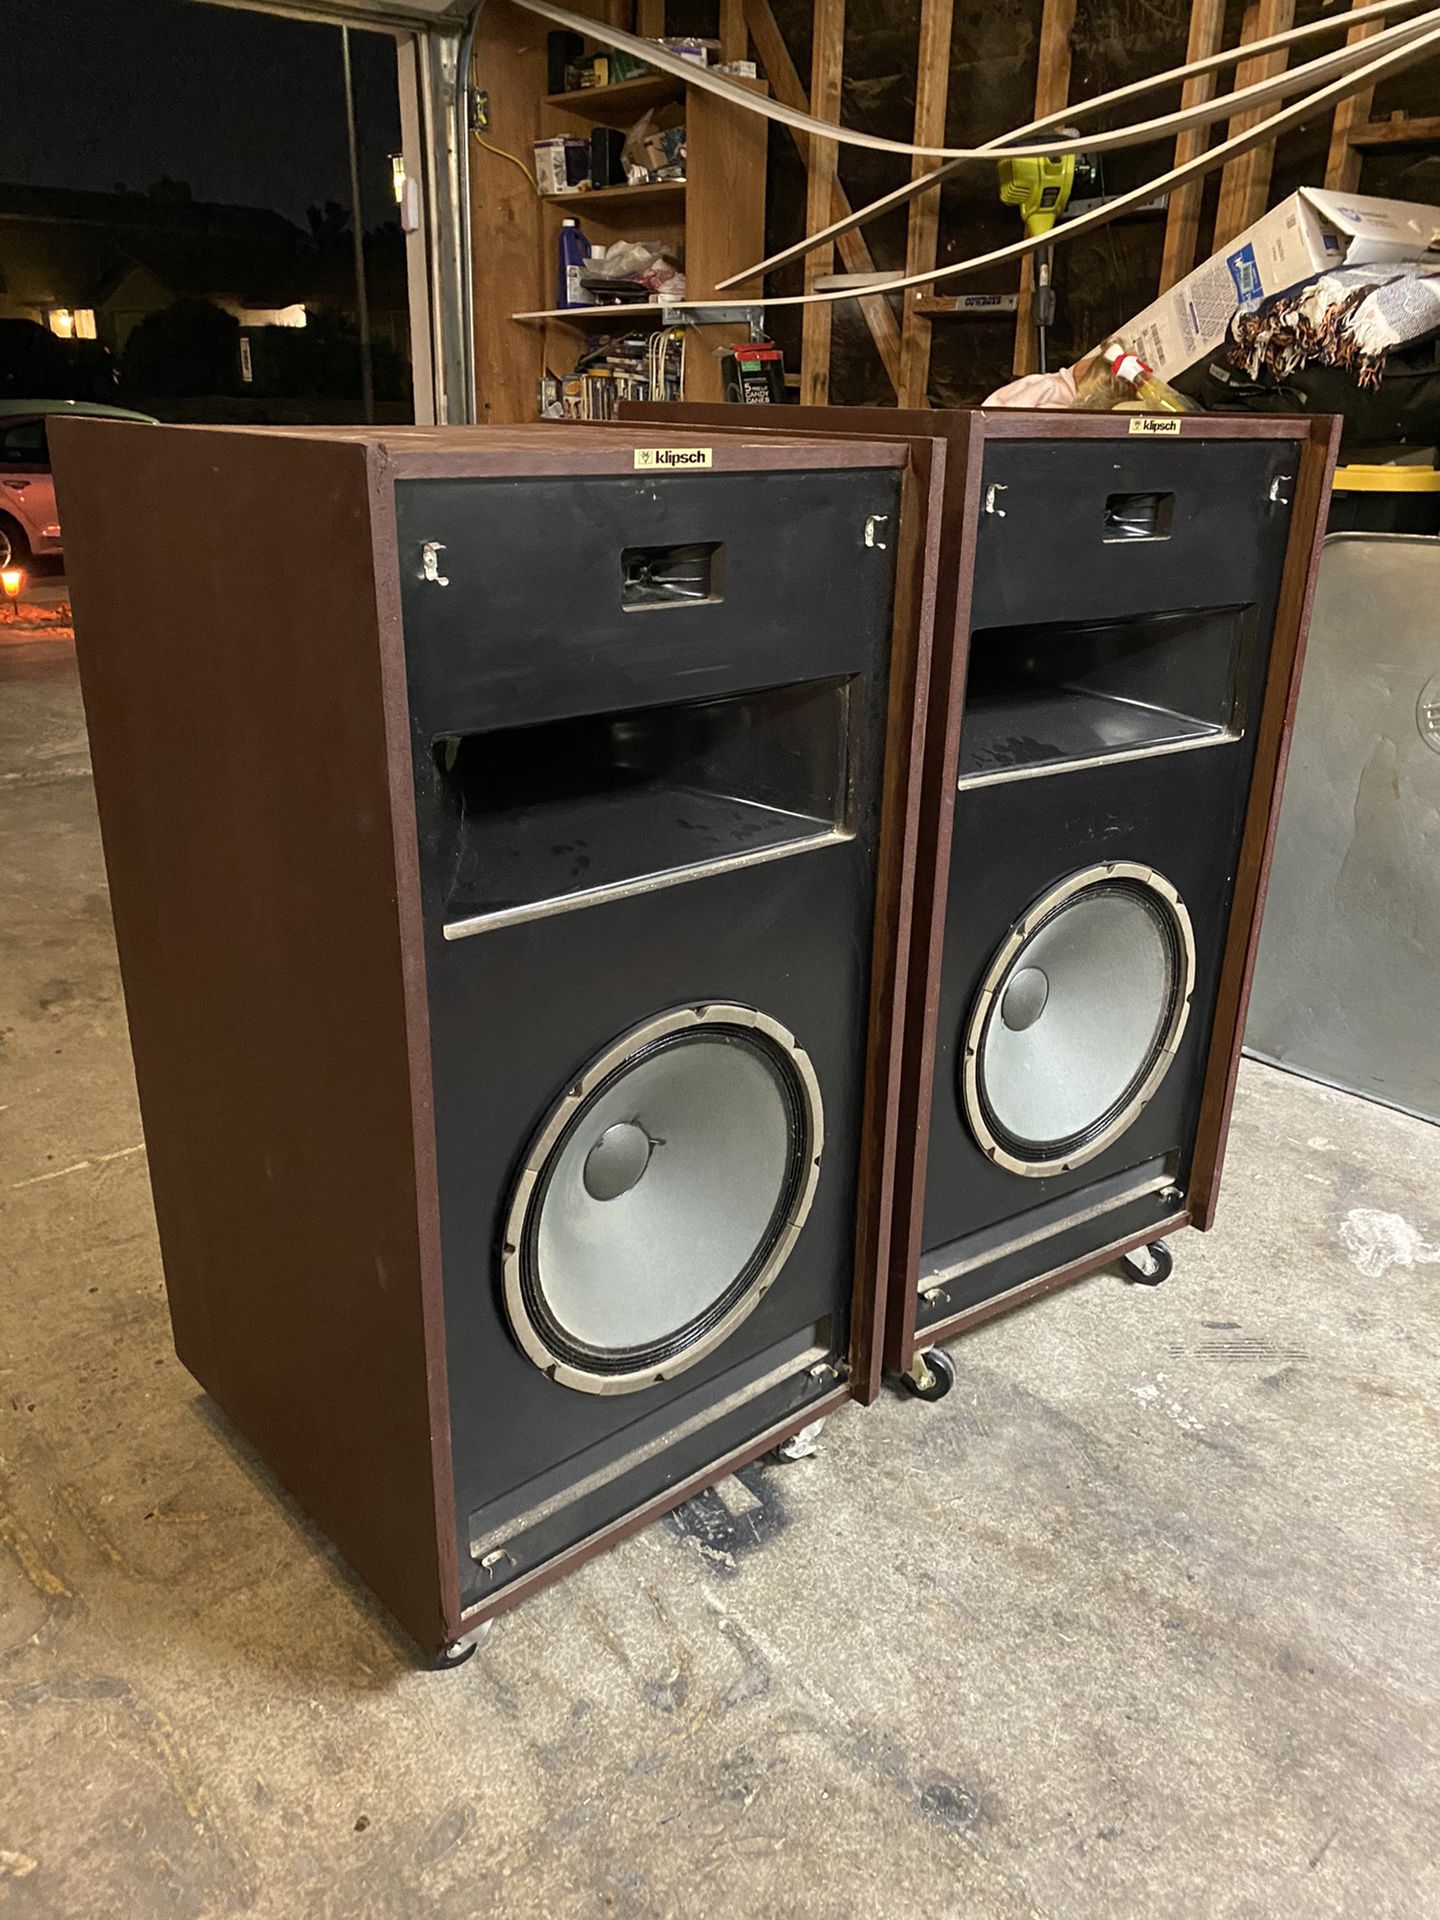 EPIC Speaker Systems Klipsch Vintage Horn speakers 15” Grills included **IF UP ITS STILL AVAILABLE** NO LOWBALLS